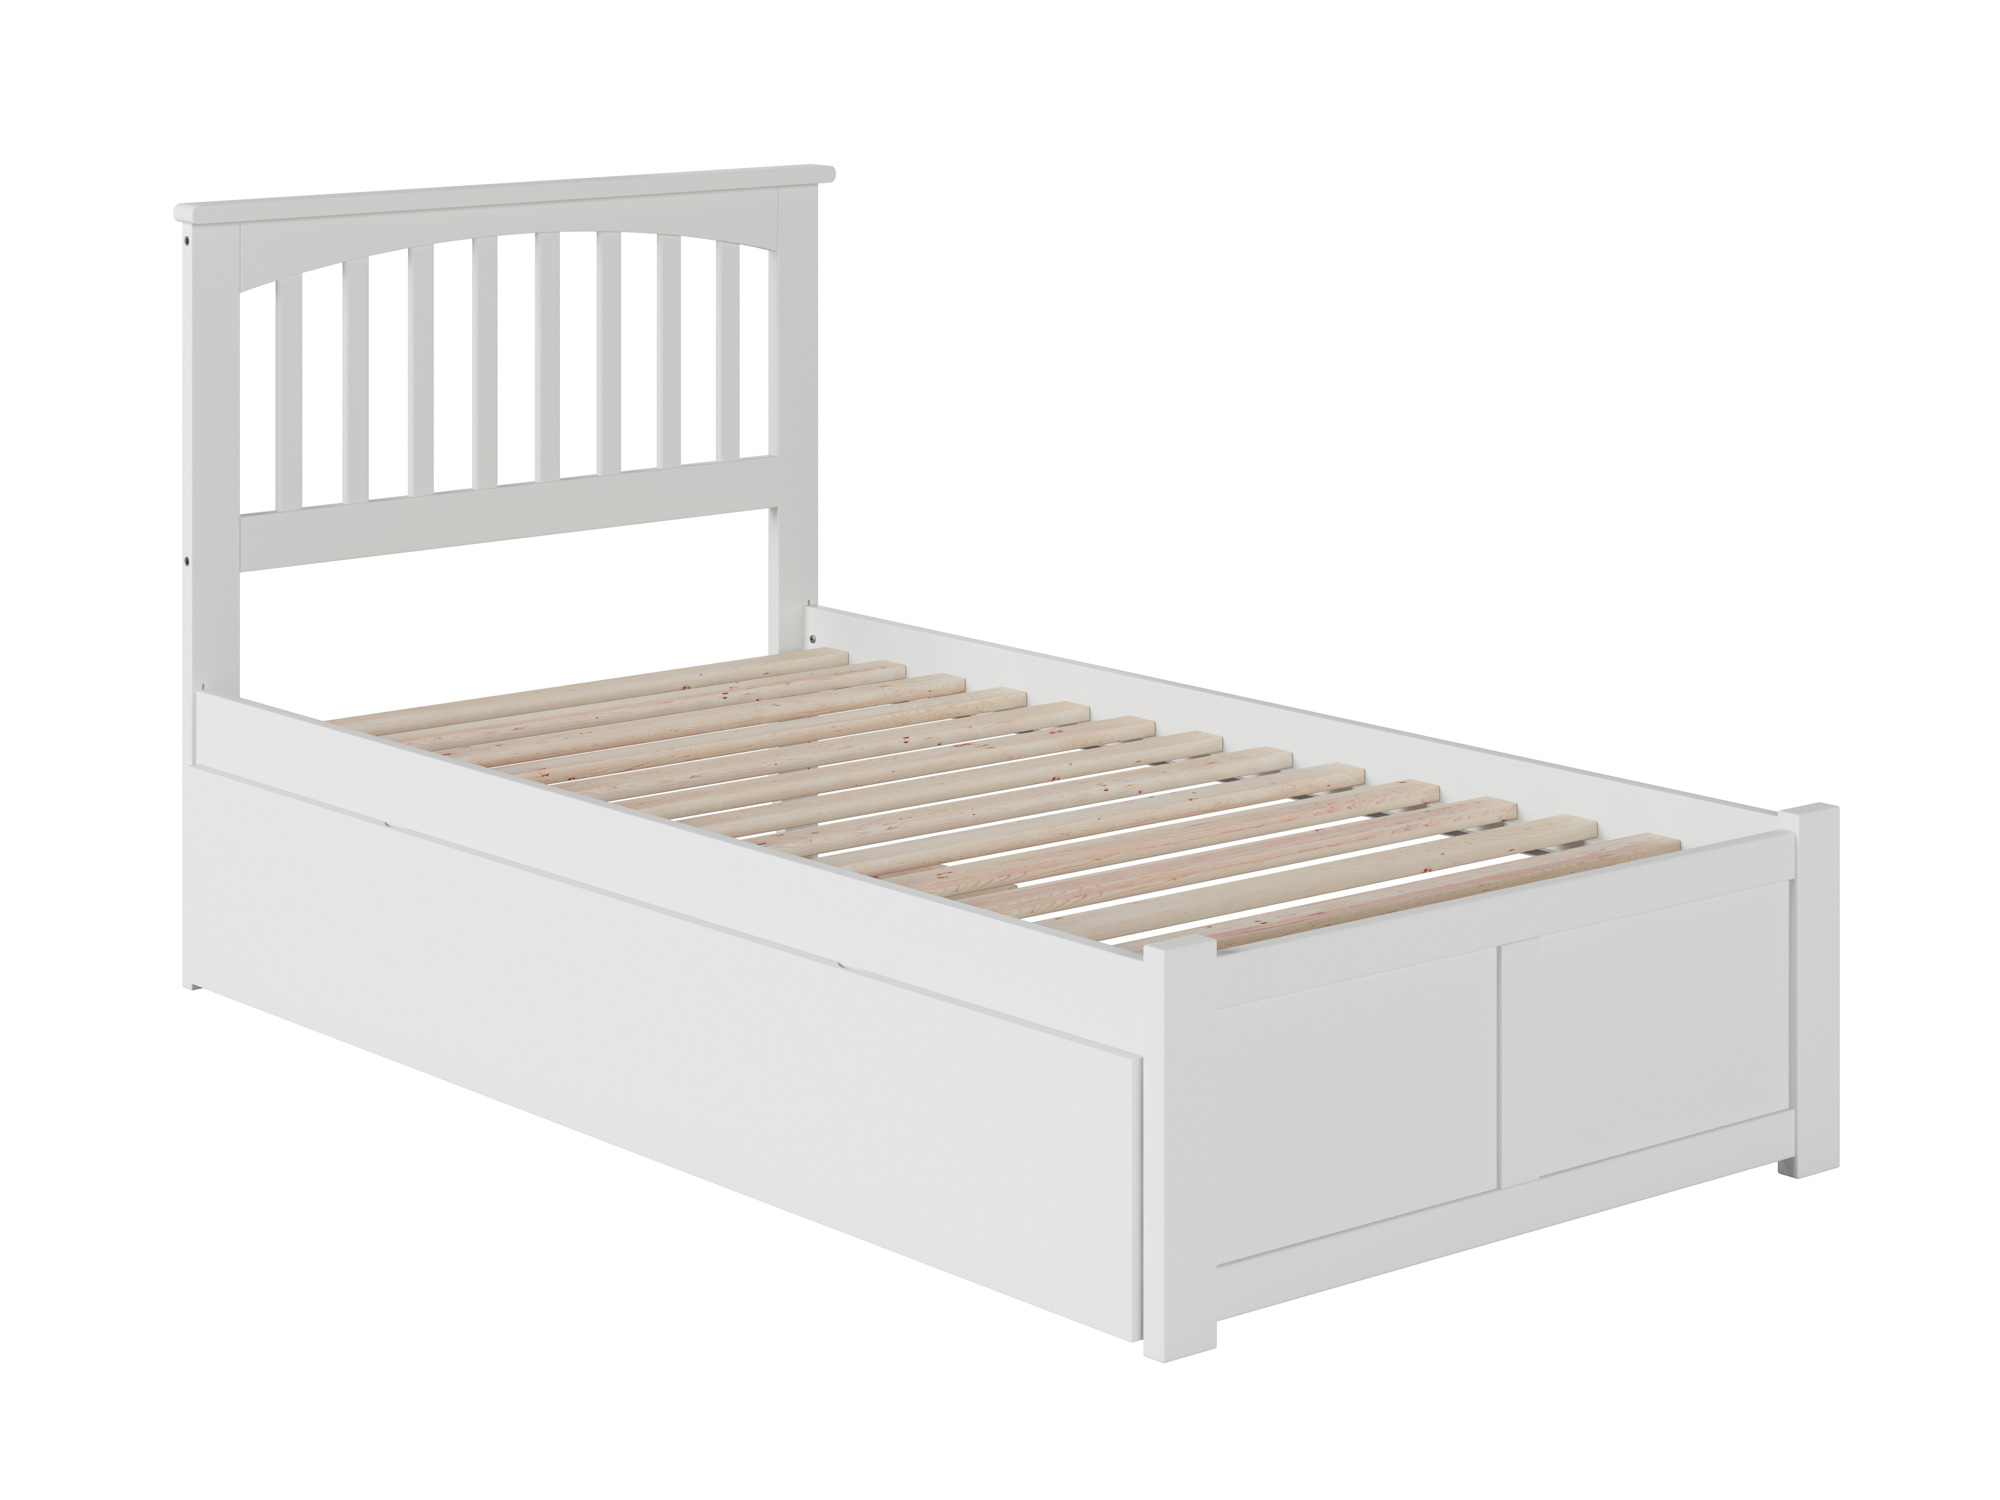 Mission Twin Extra Long Bed with Footboard and Twin Extra Long Trundle in White - image 1 of 7